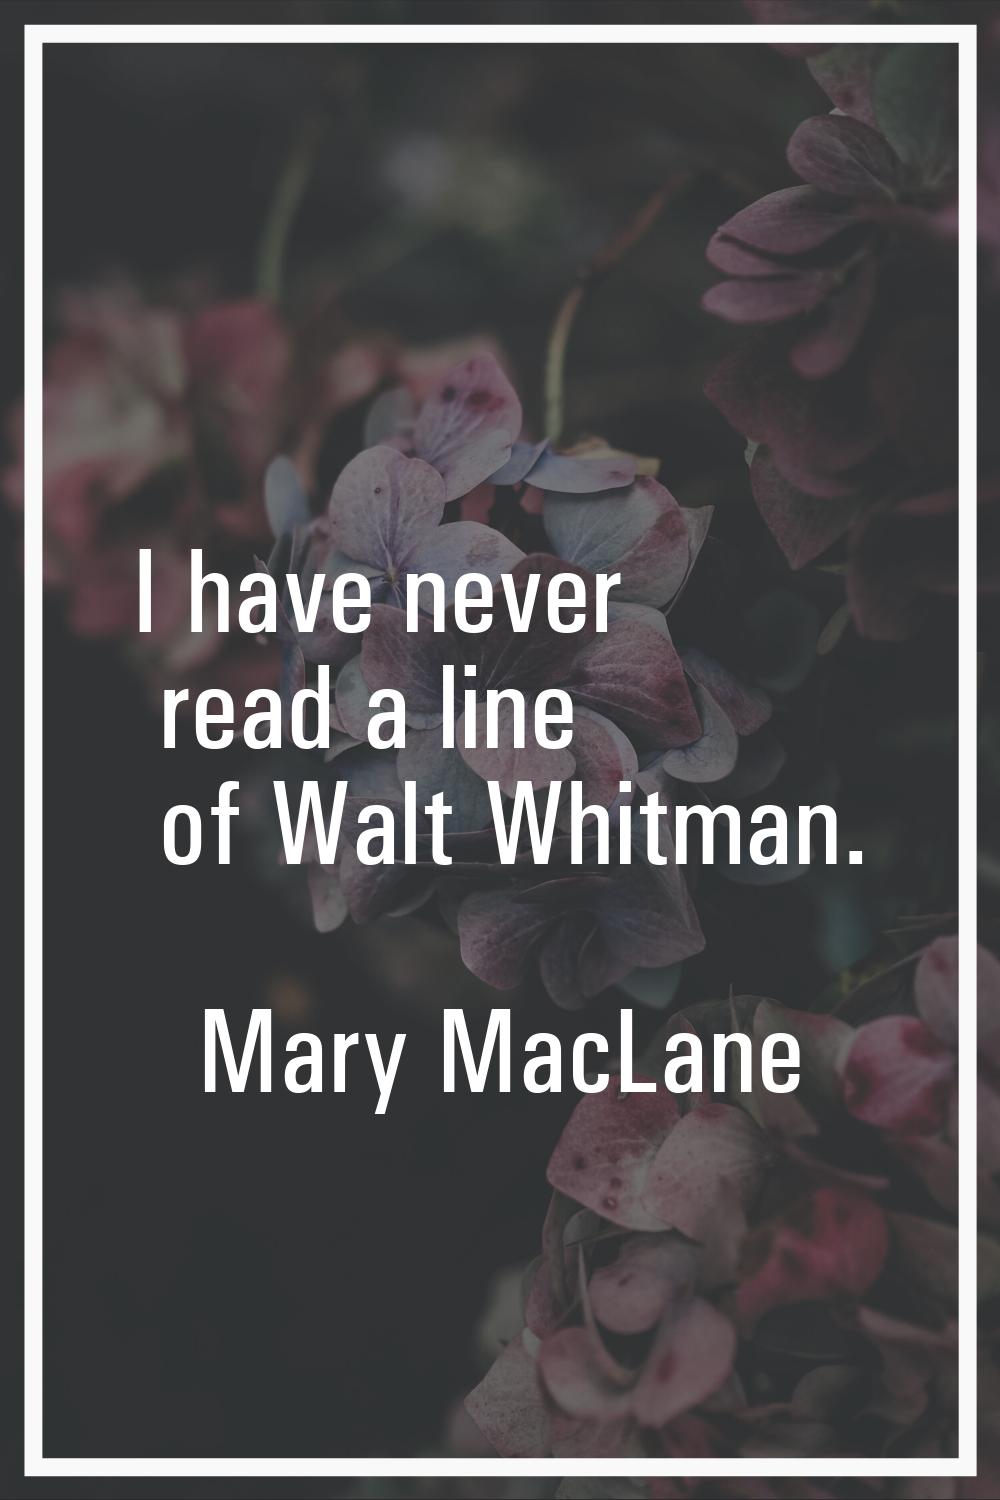 I have never read a line of Walt Whitman.